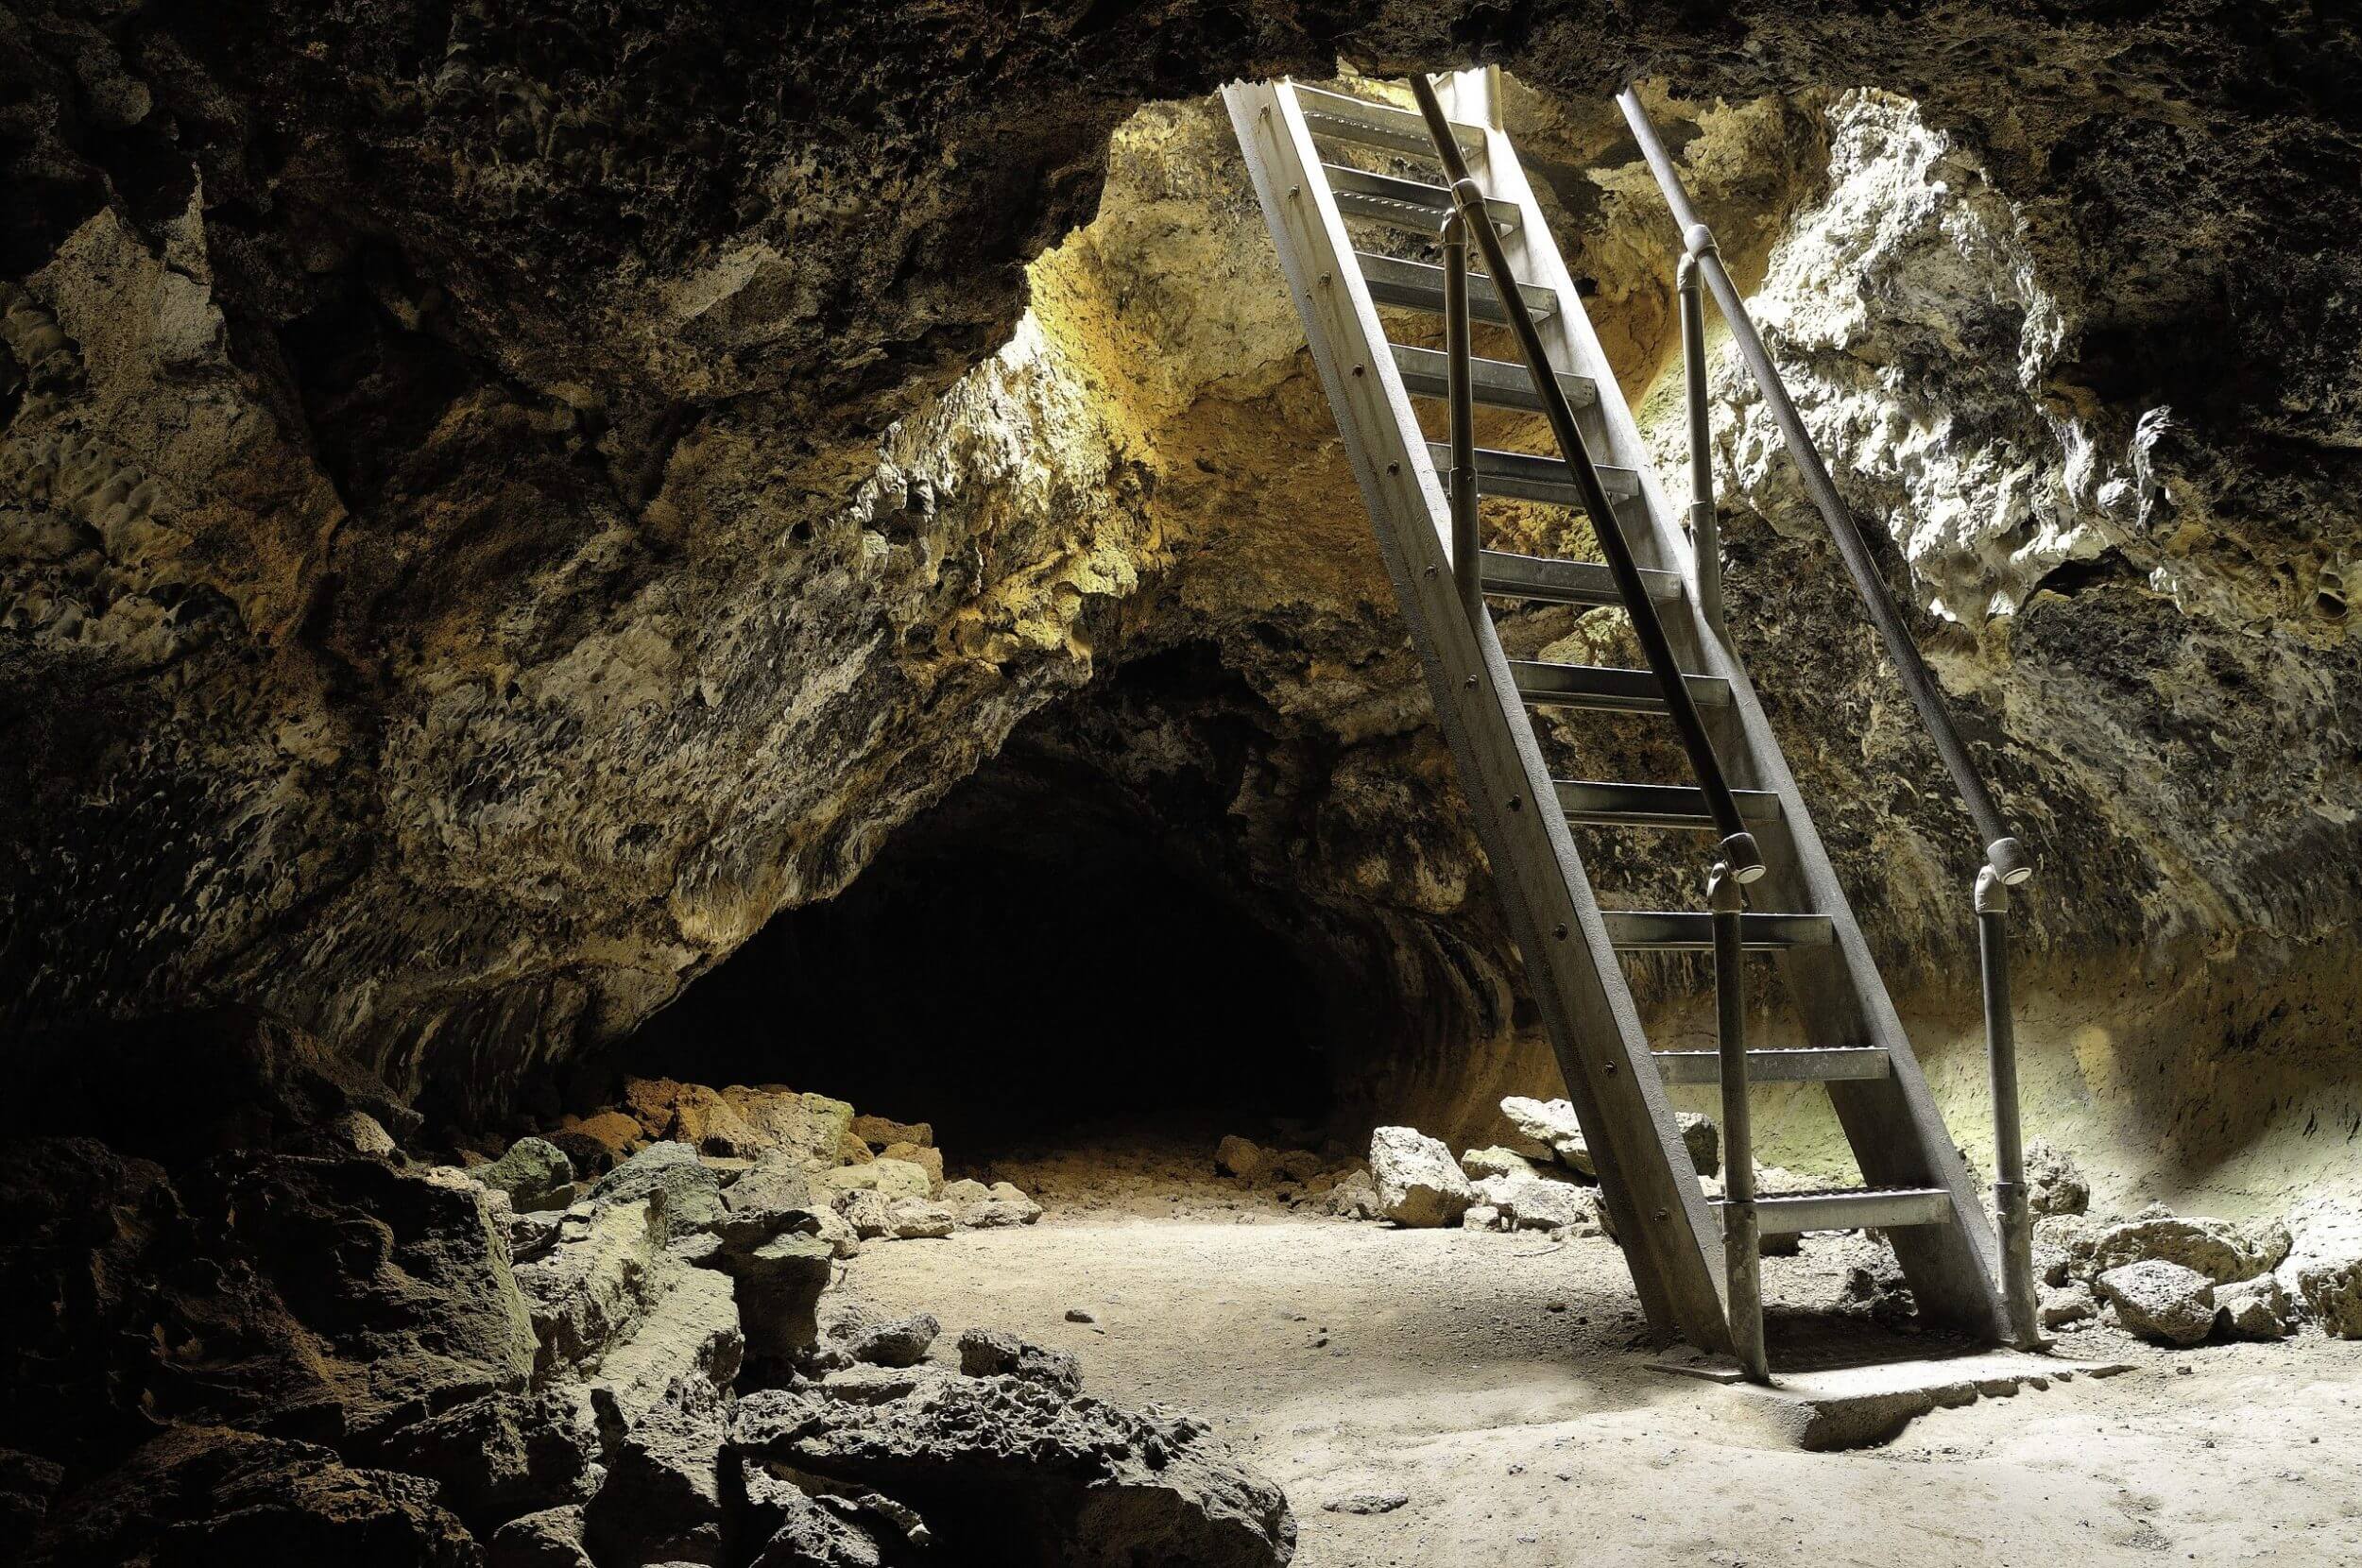 Sunlight pours through the entrance of Golden Dome Cave at Lava Beds National Monument in Northern California